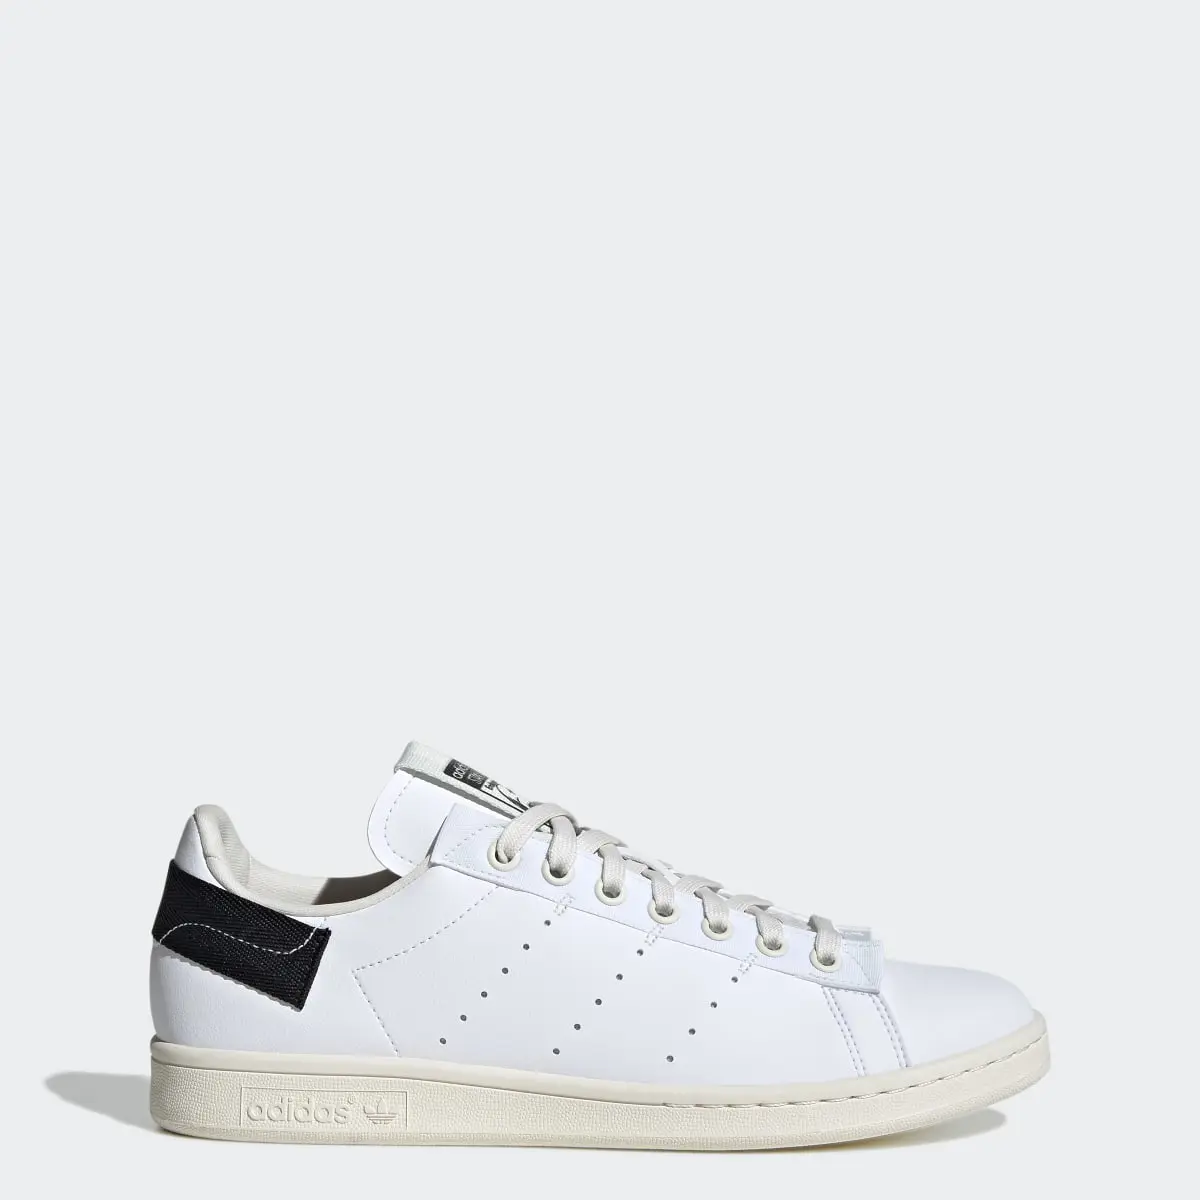 Adidas Stan Smith Parley Shoes. 1